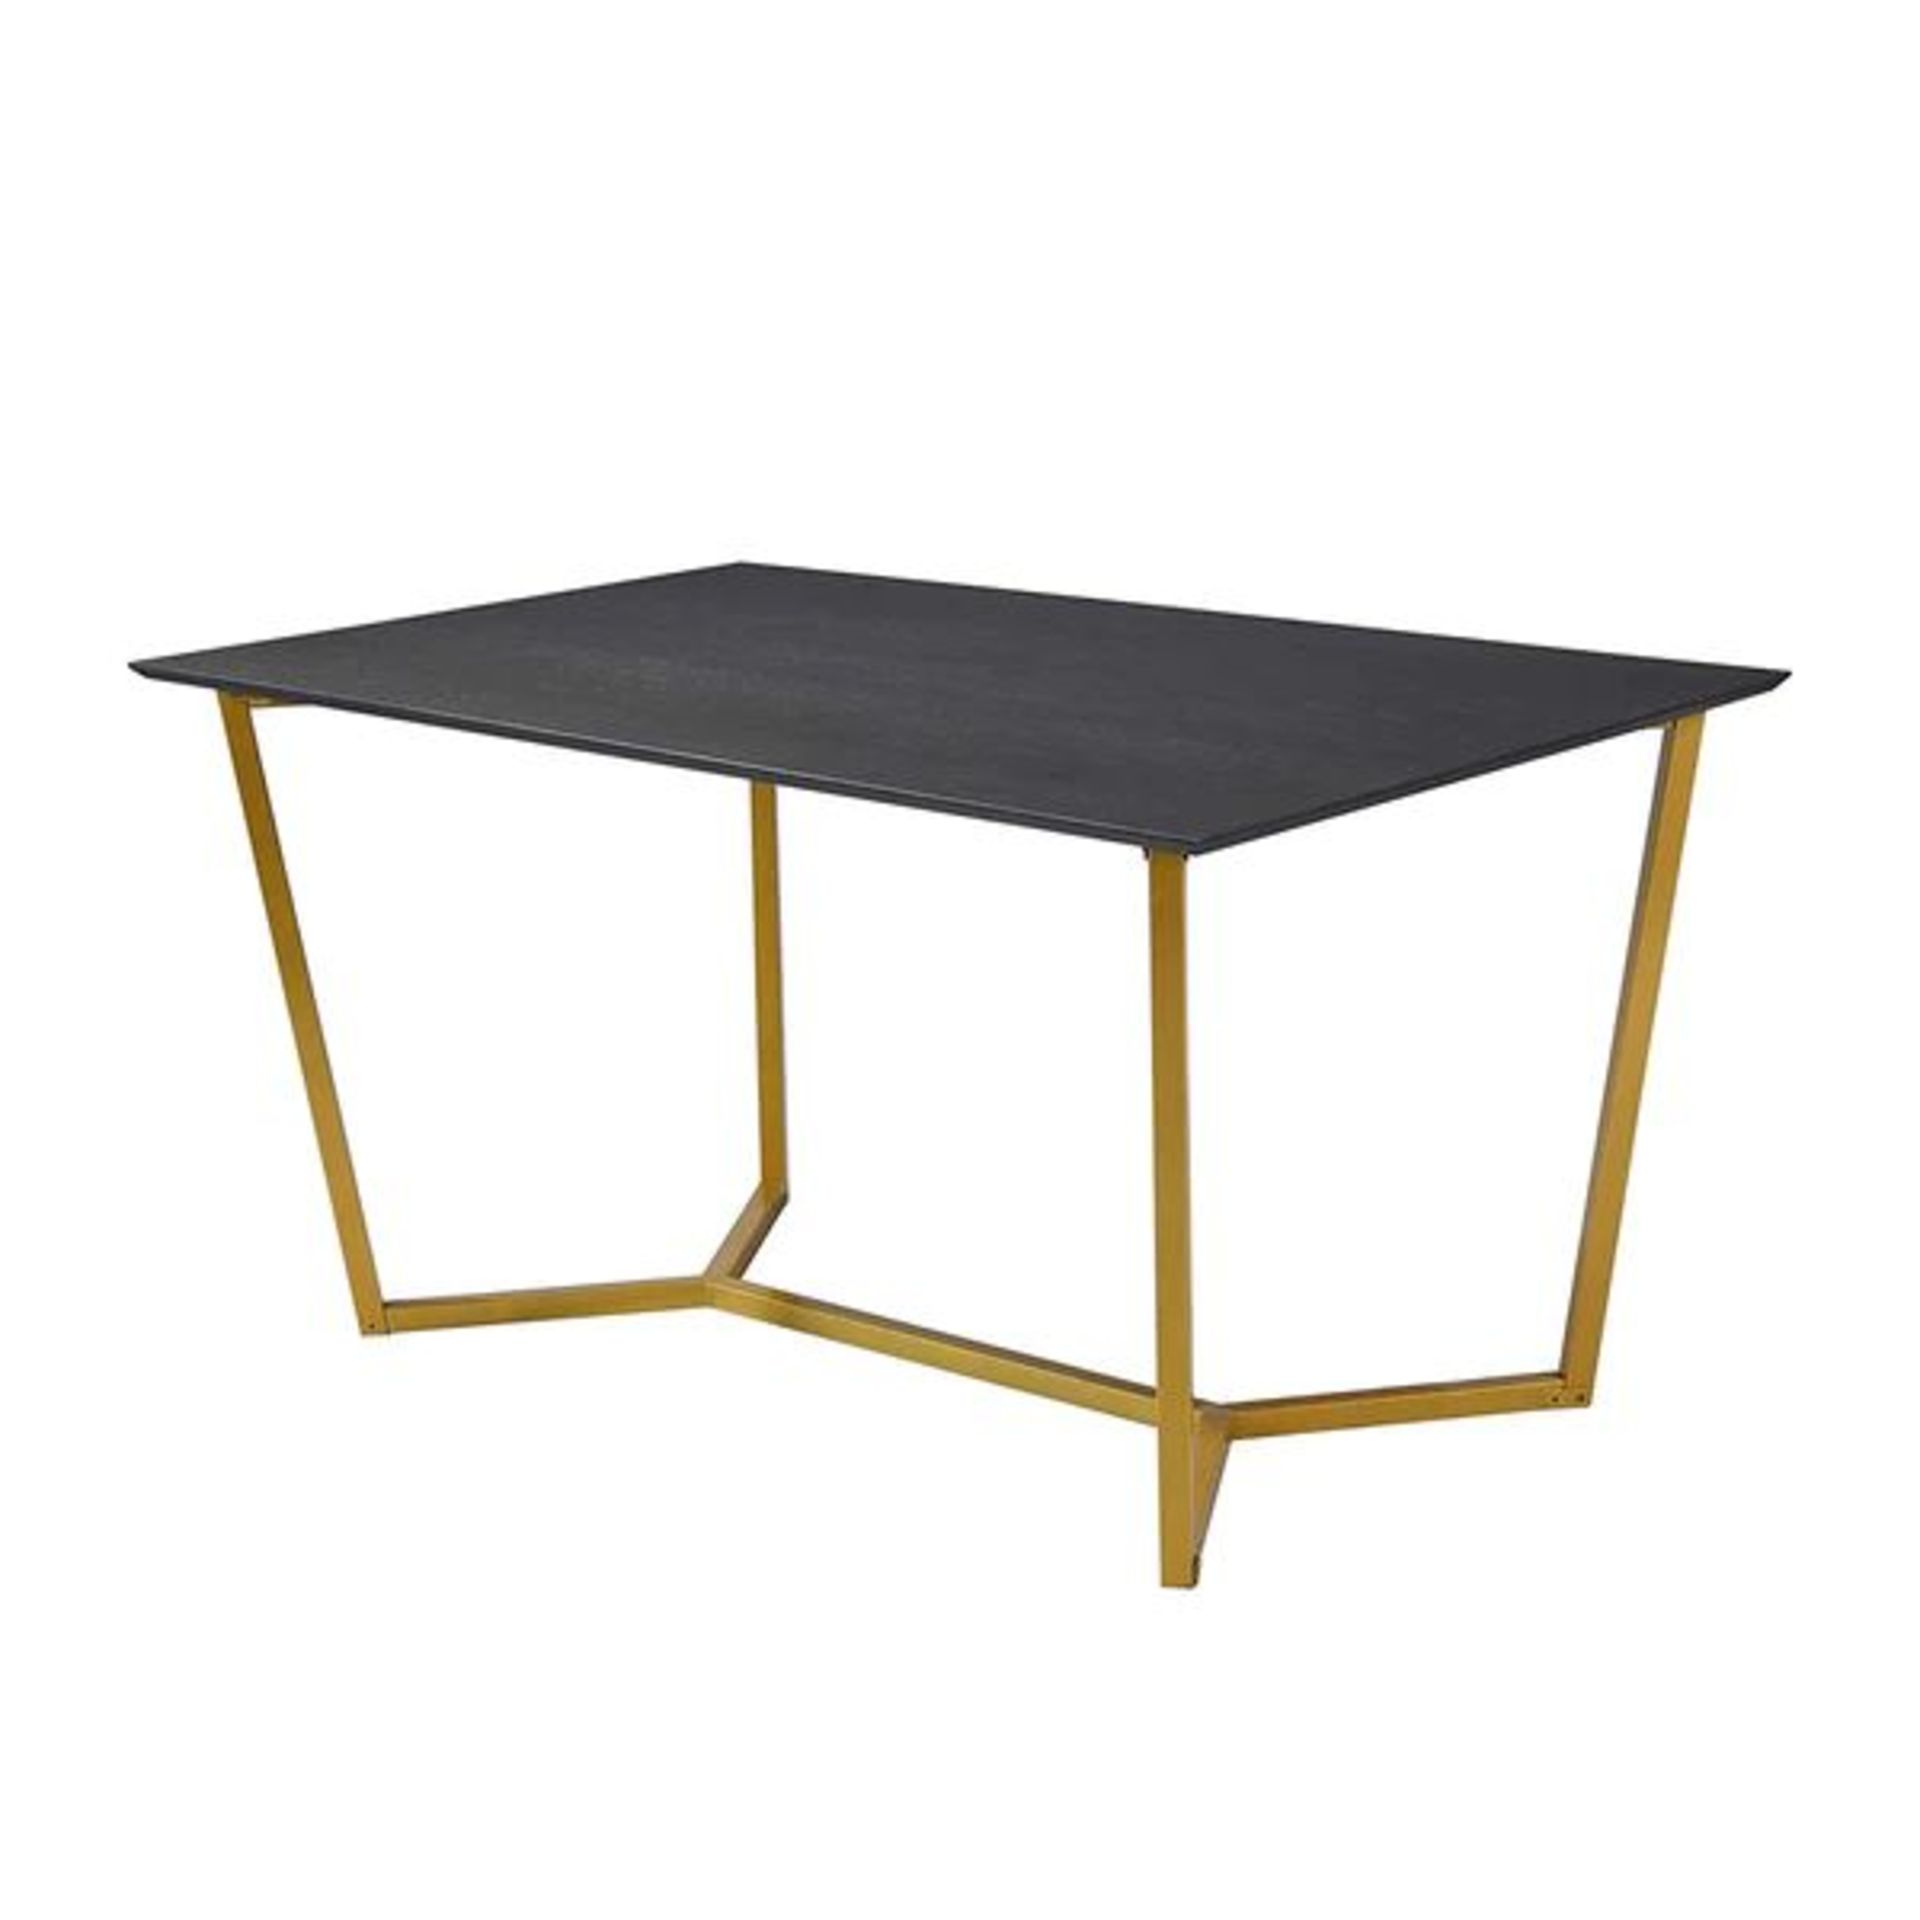 SIERRE 6 Seater Dark Oak Dining Table with Geometric Metal Legs. - R19.6. RRP £399.99. Golden colour - Image 2 of 2